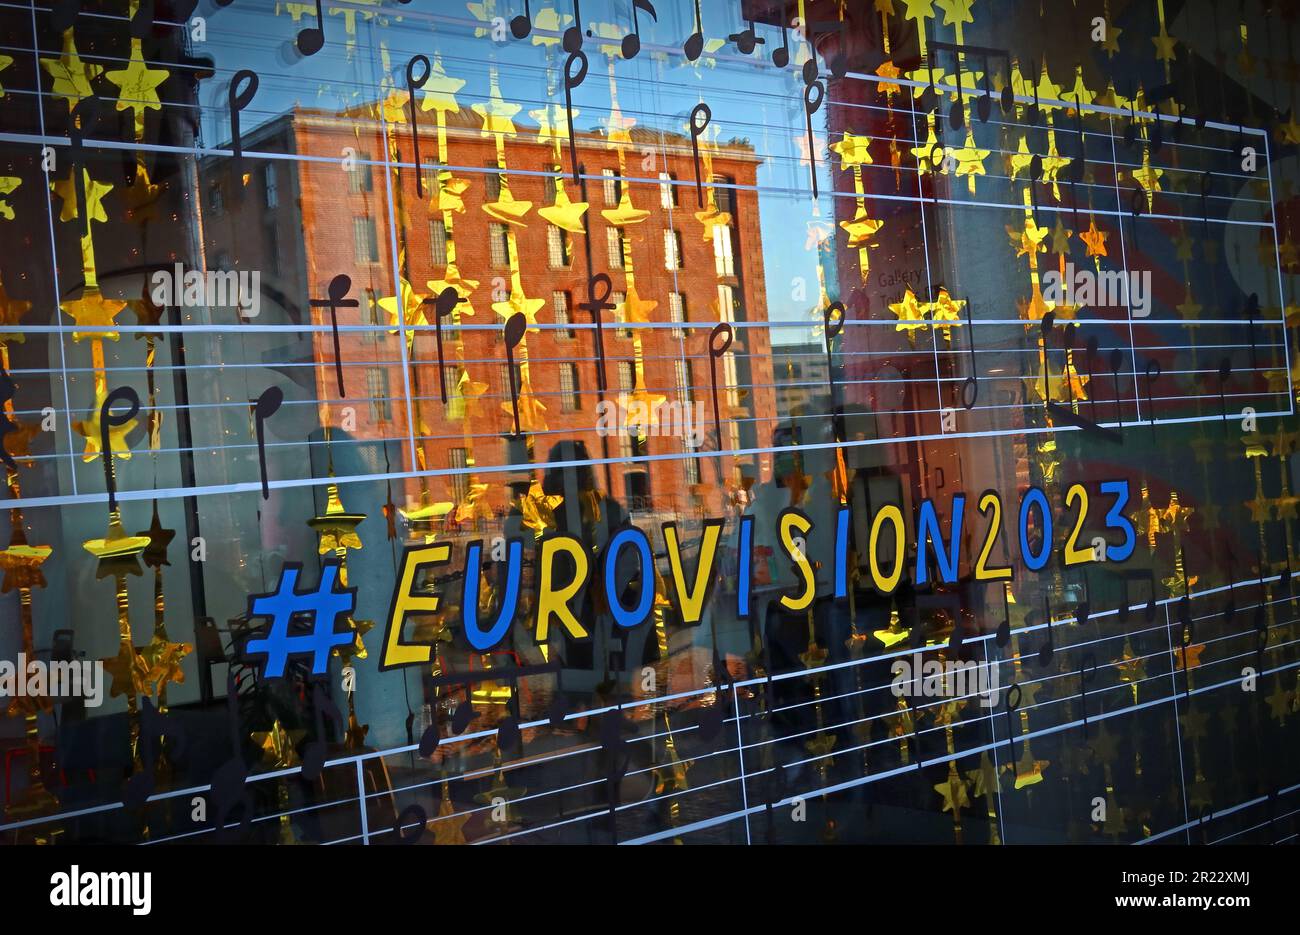 Eurovision2023 decorated shop window, with the Royal Albert Dock sunset reflected, Liverpool, Merseyside, England, UK, L3 4AF Stock Photo